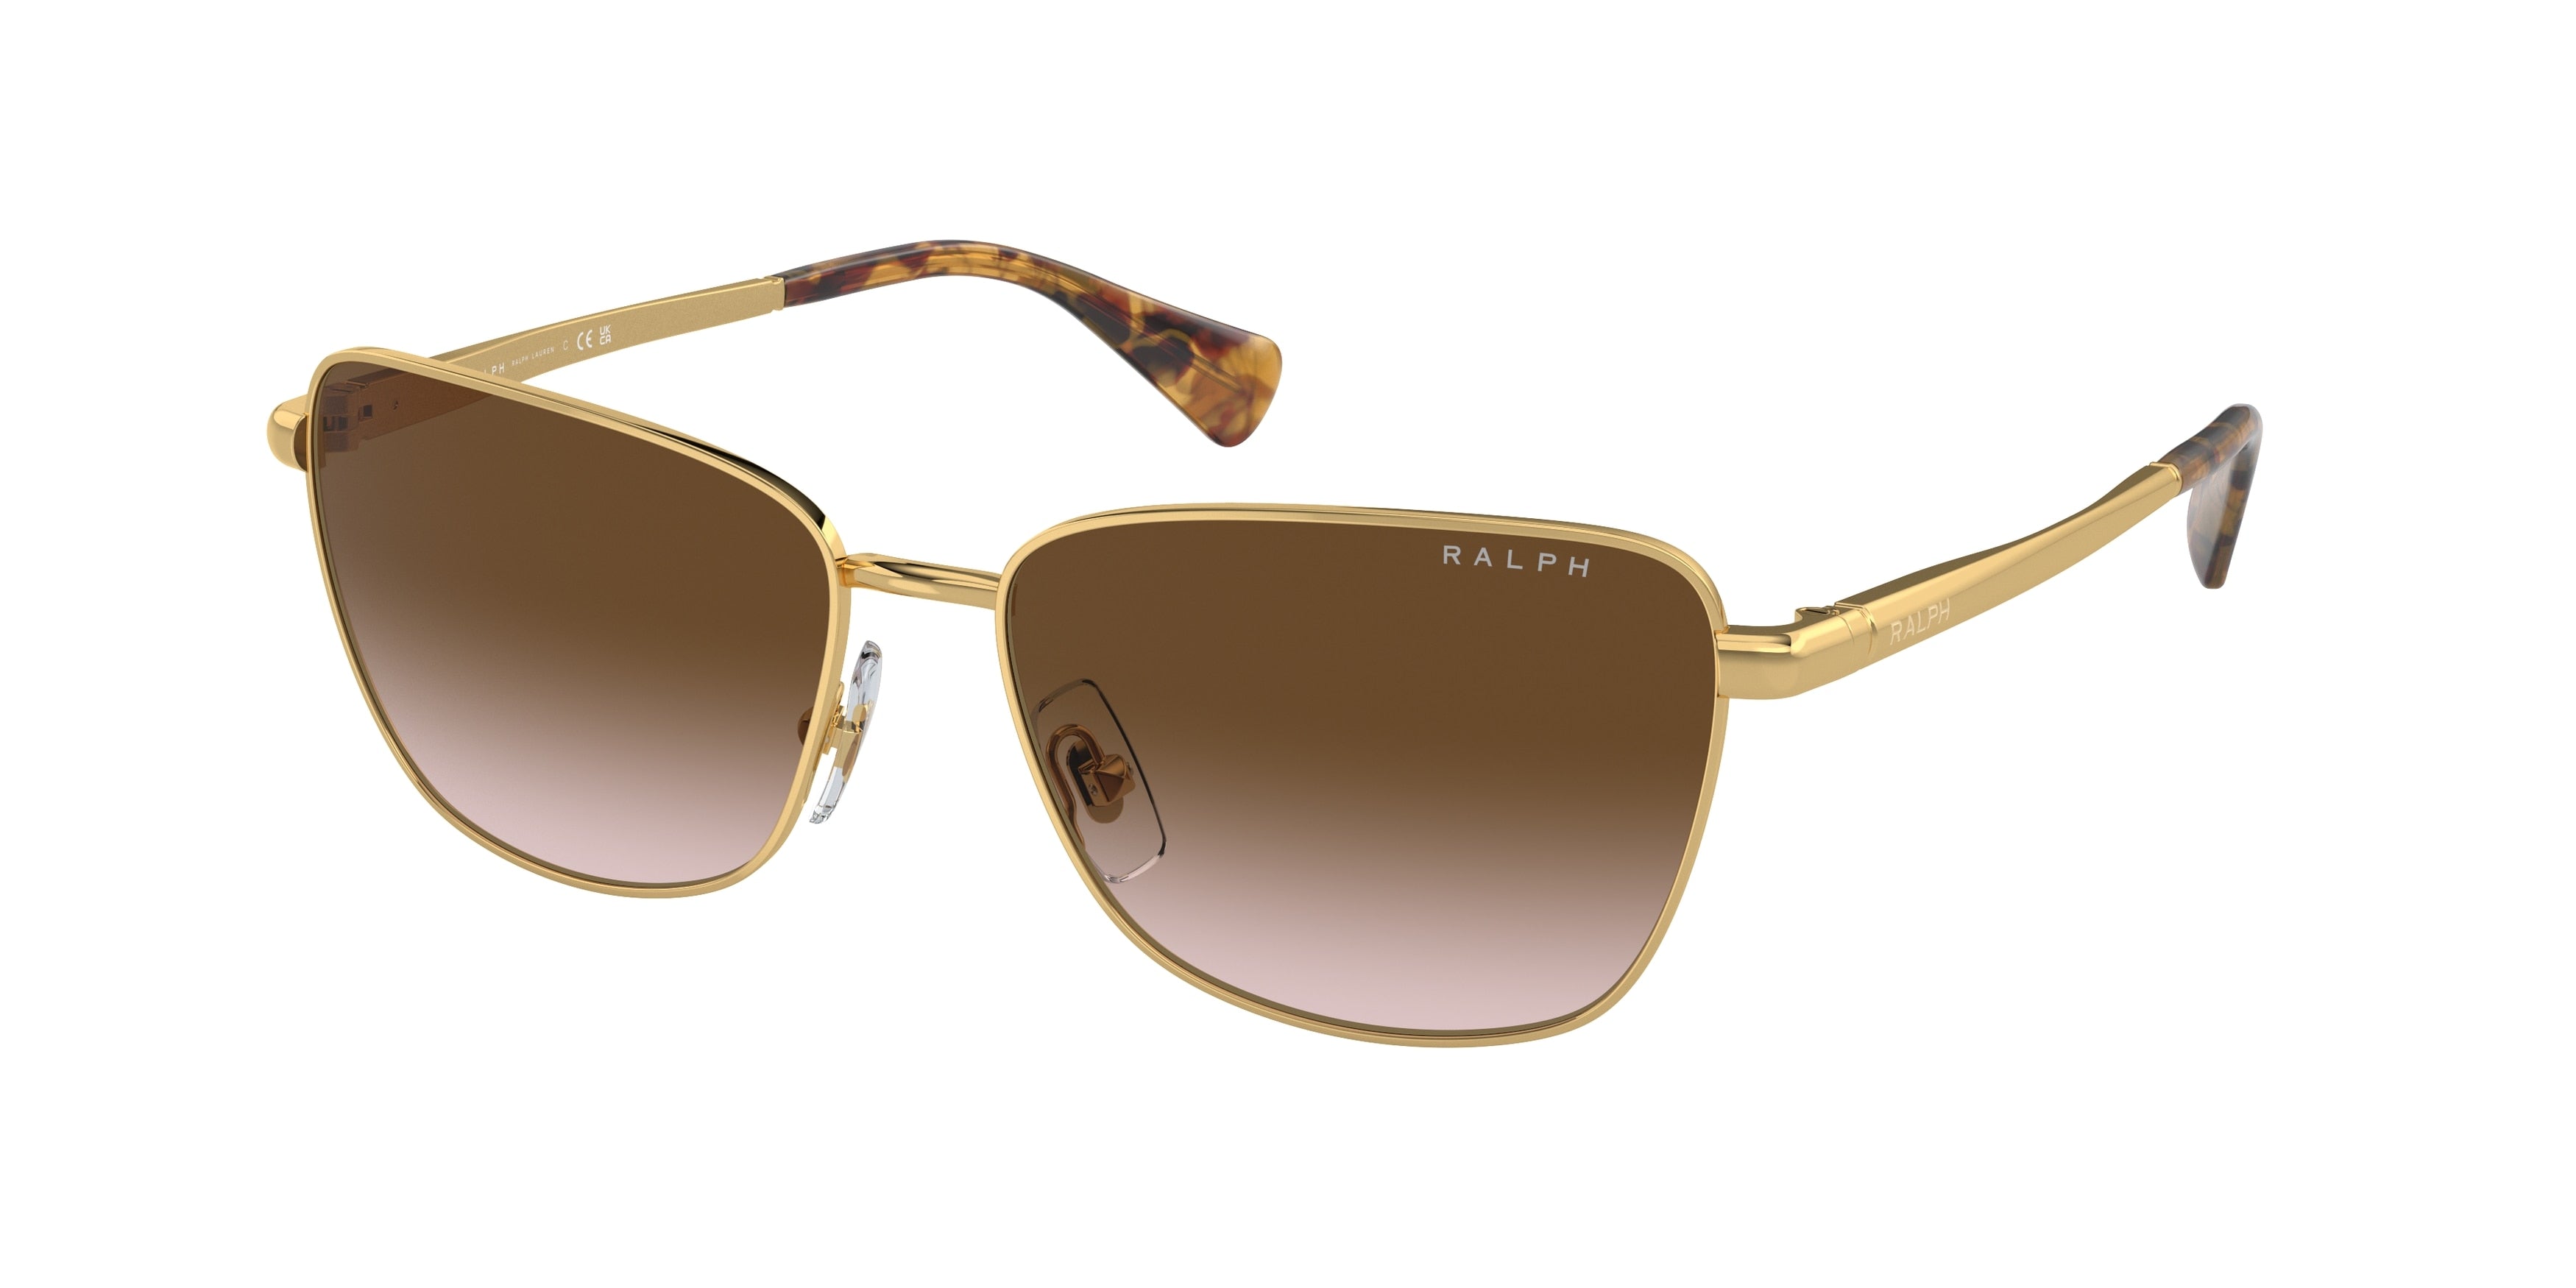 Ralph RA4143 Butterfly Sunglasses  900413-Shiny Gold 57-145-15 - Color Map Gold